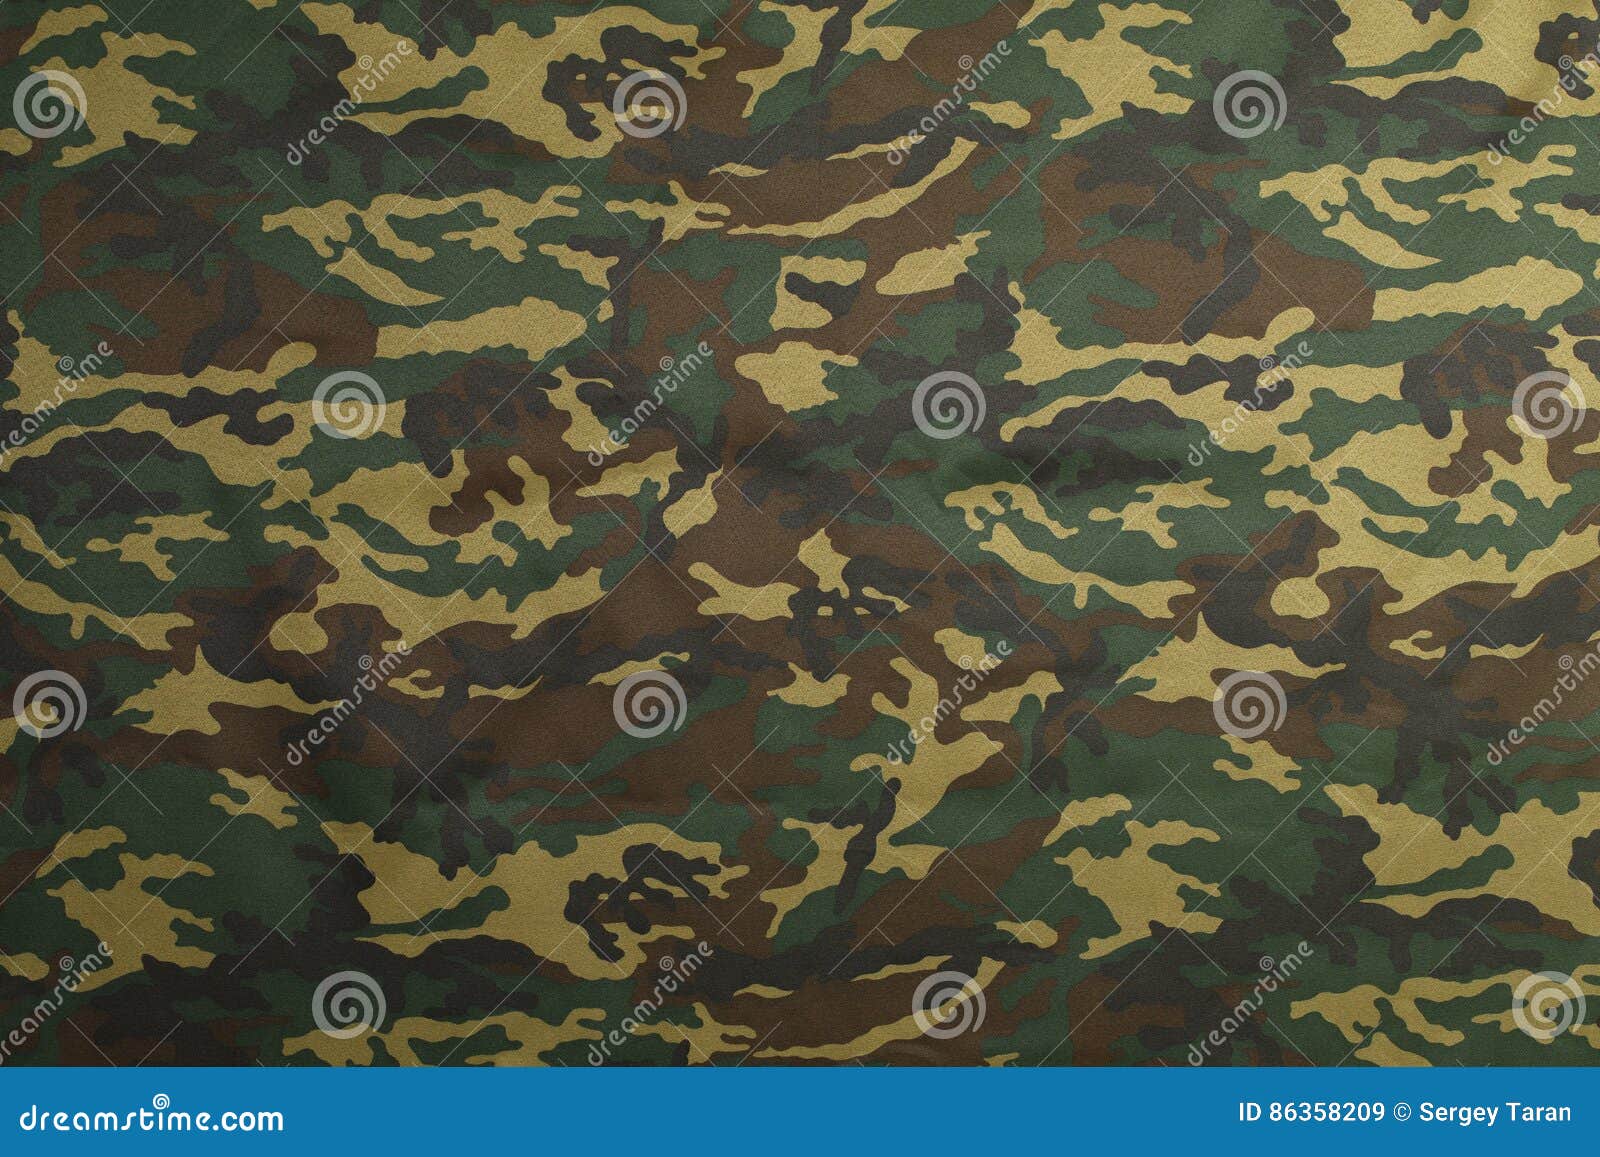 green camouflage pattern